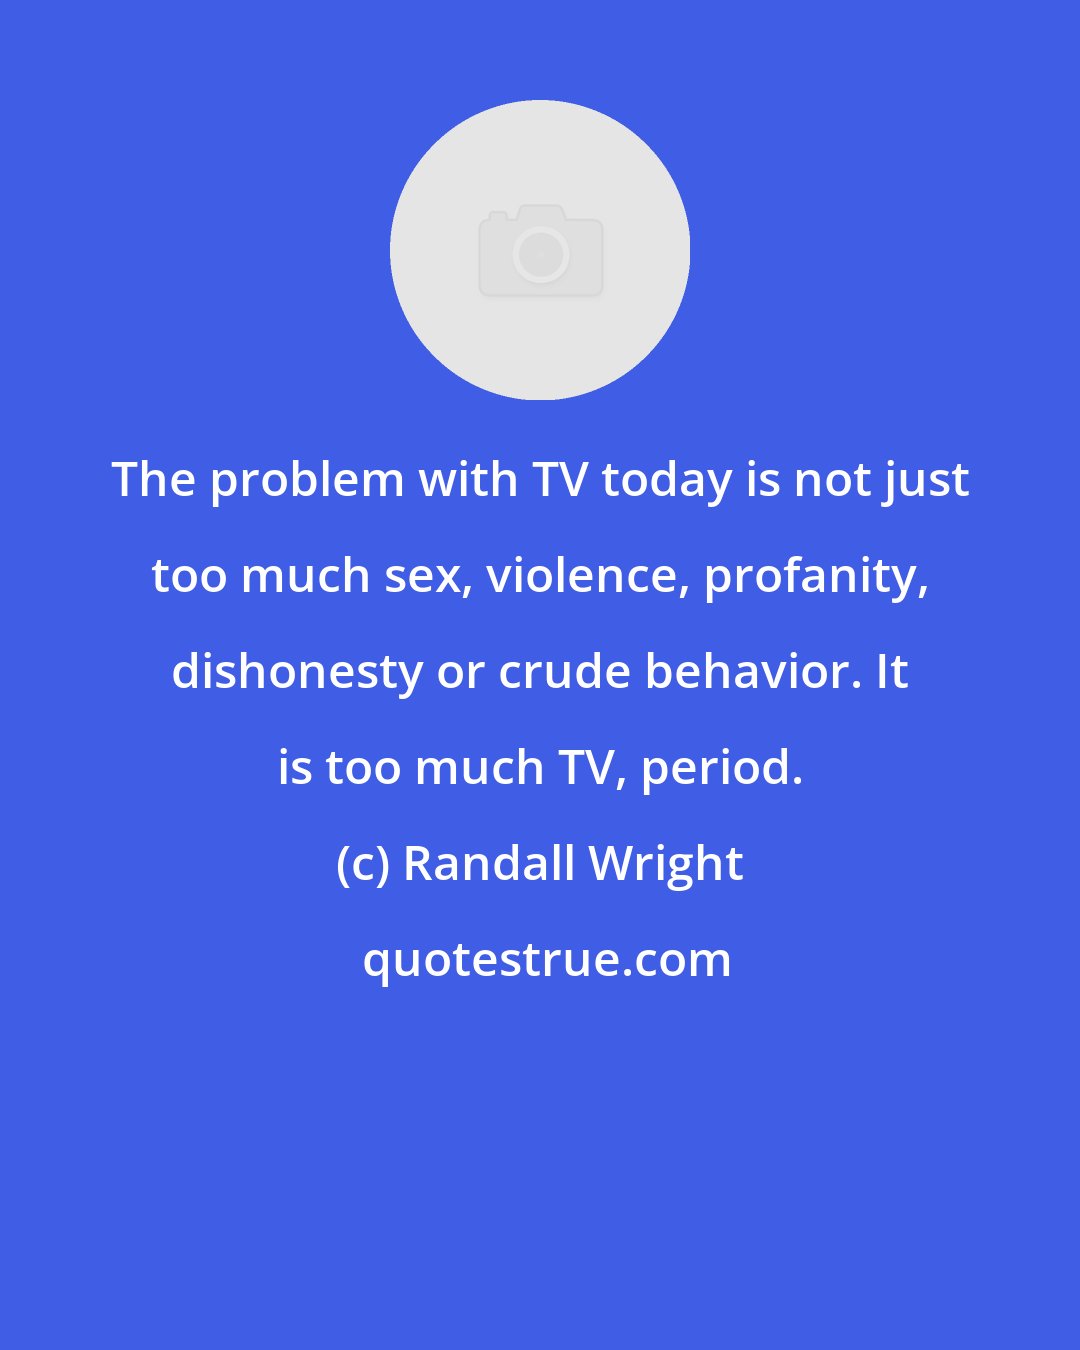 Randall Wright: The problem with TV today is not just too much sex, violence, profanity, dishonesty or crude behavior. It is too much TV, period.